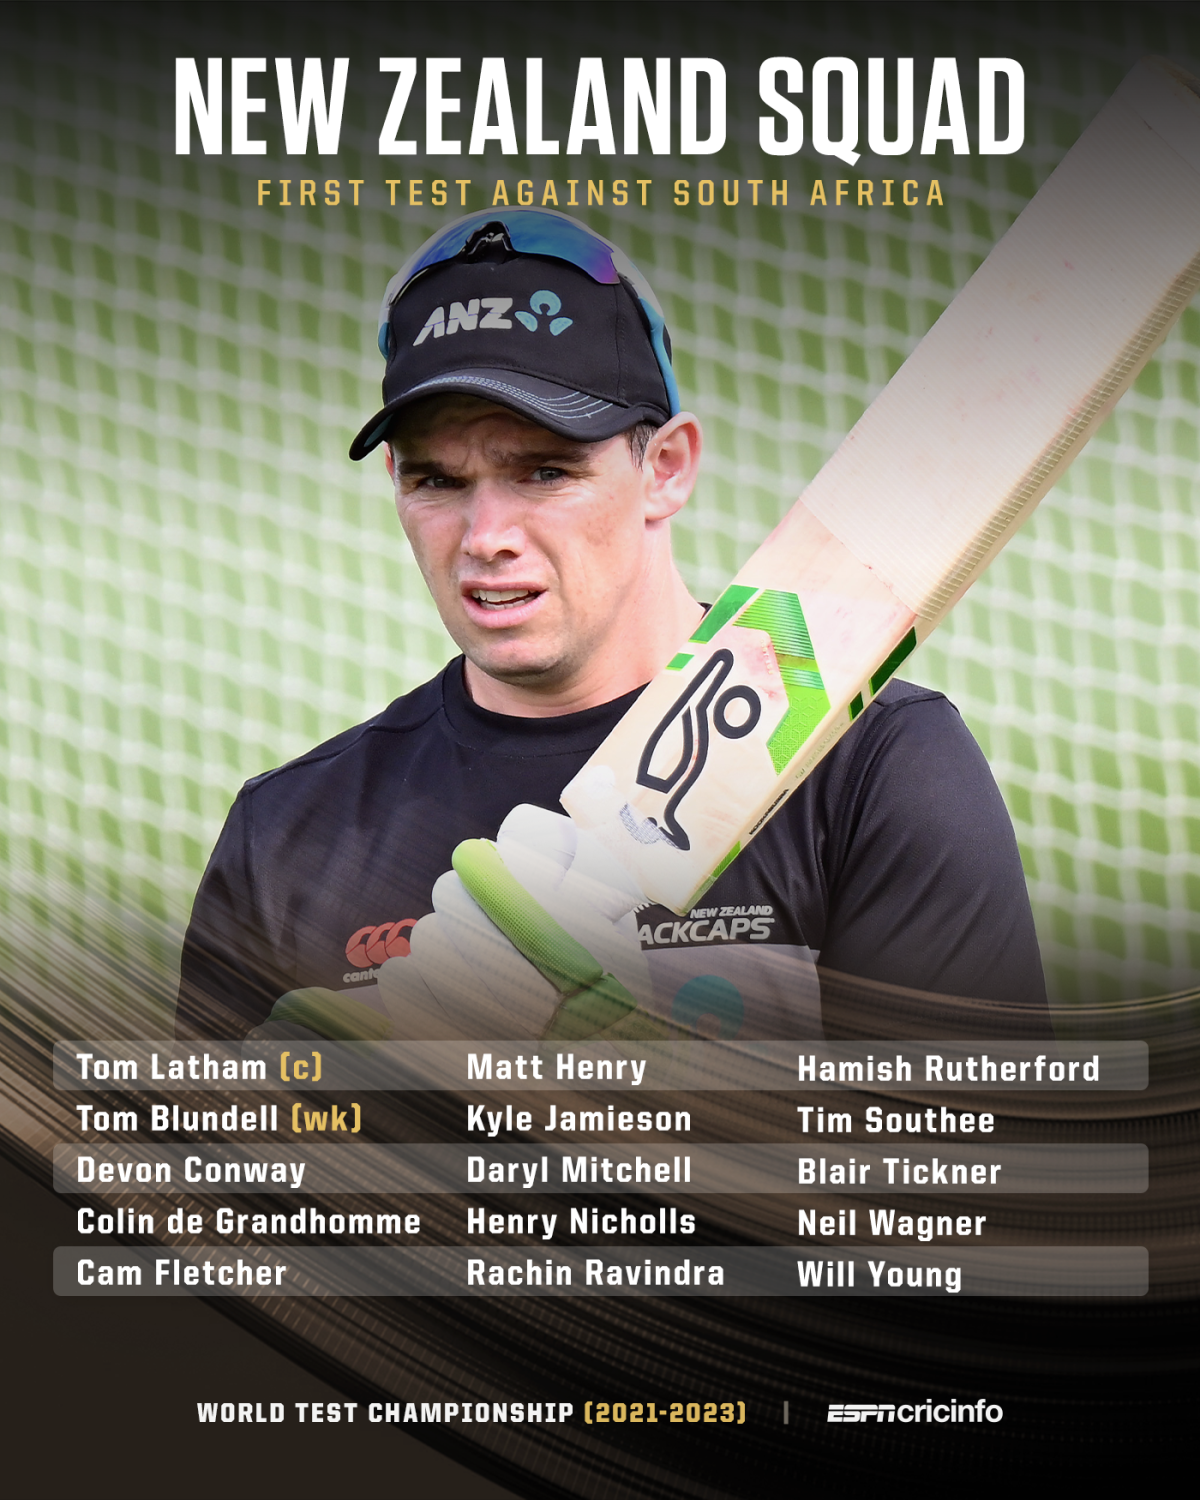 New Zealand squad for first Test against South Africa | ESPNcricinfo.com